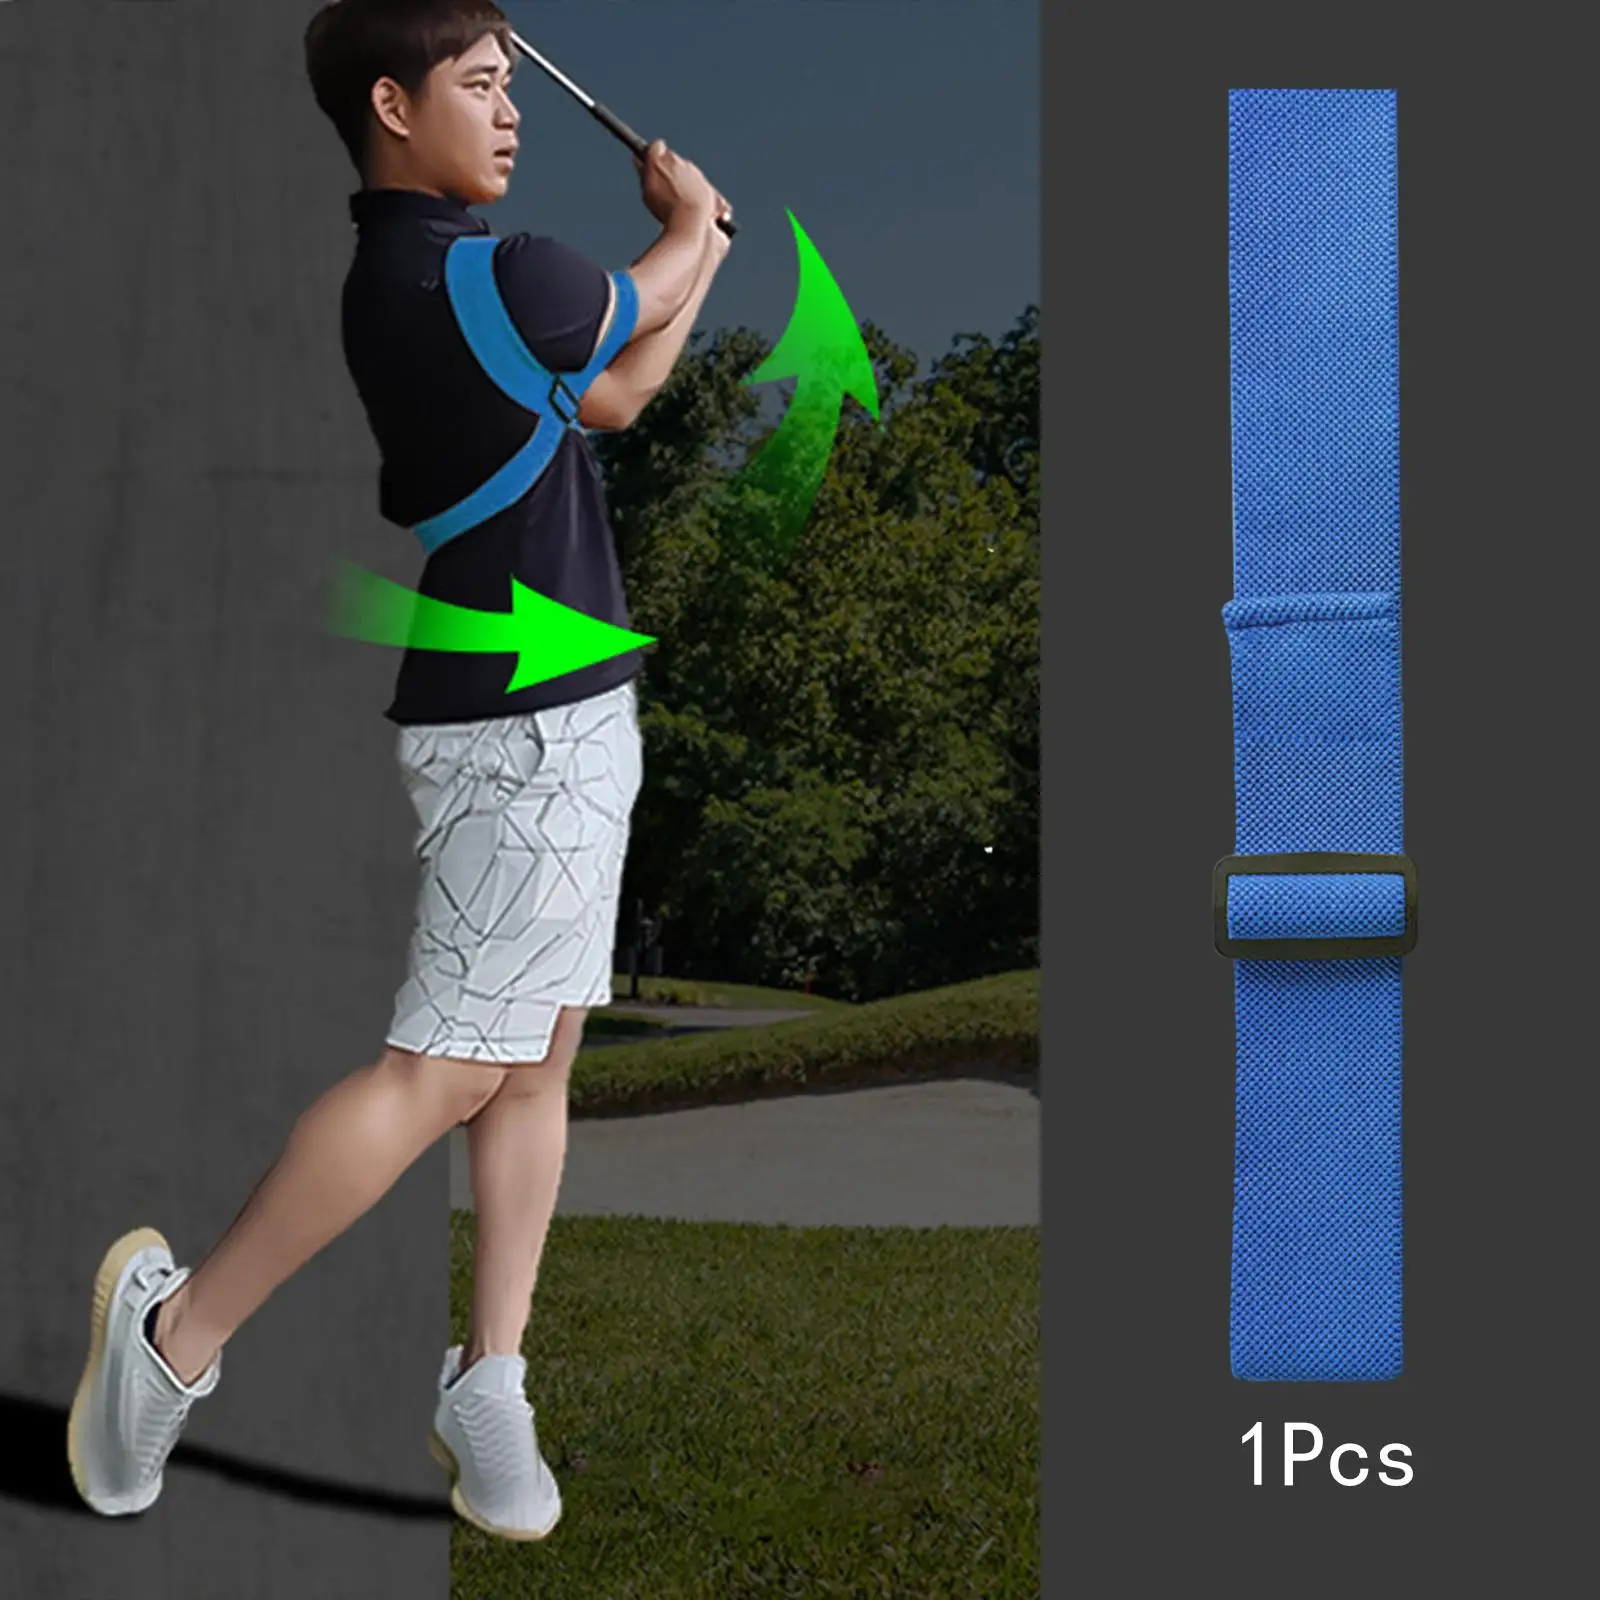 Golf Swing Trainer Bands Swing Correcting Practice Tool Softball Training Aid Forming The Correct Muscle Memory Equipment Gear